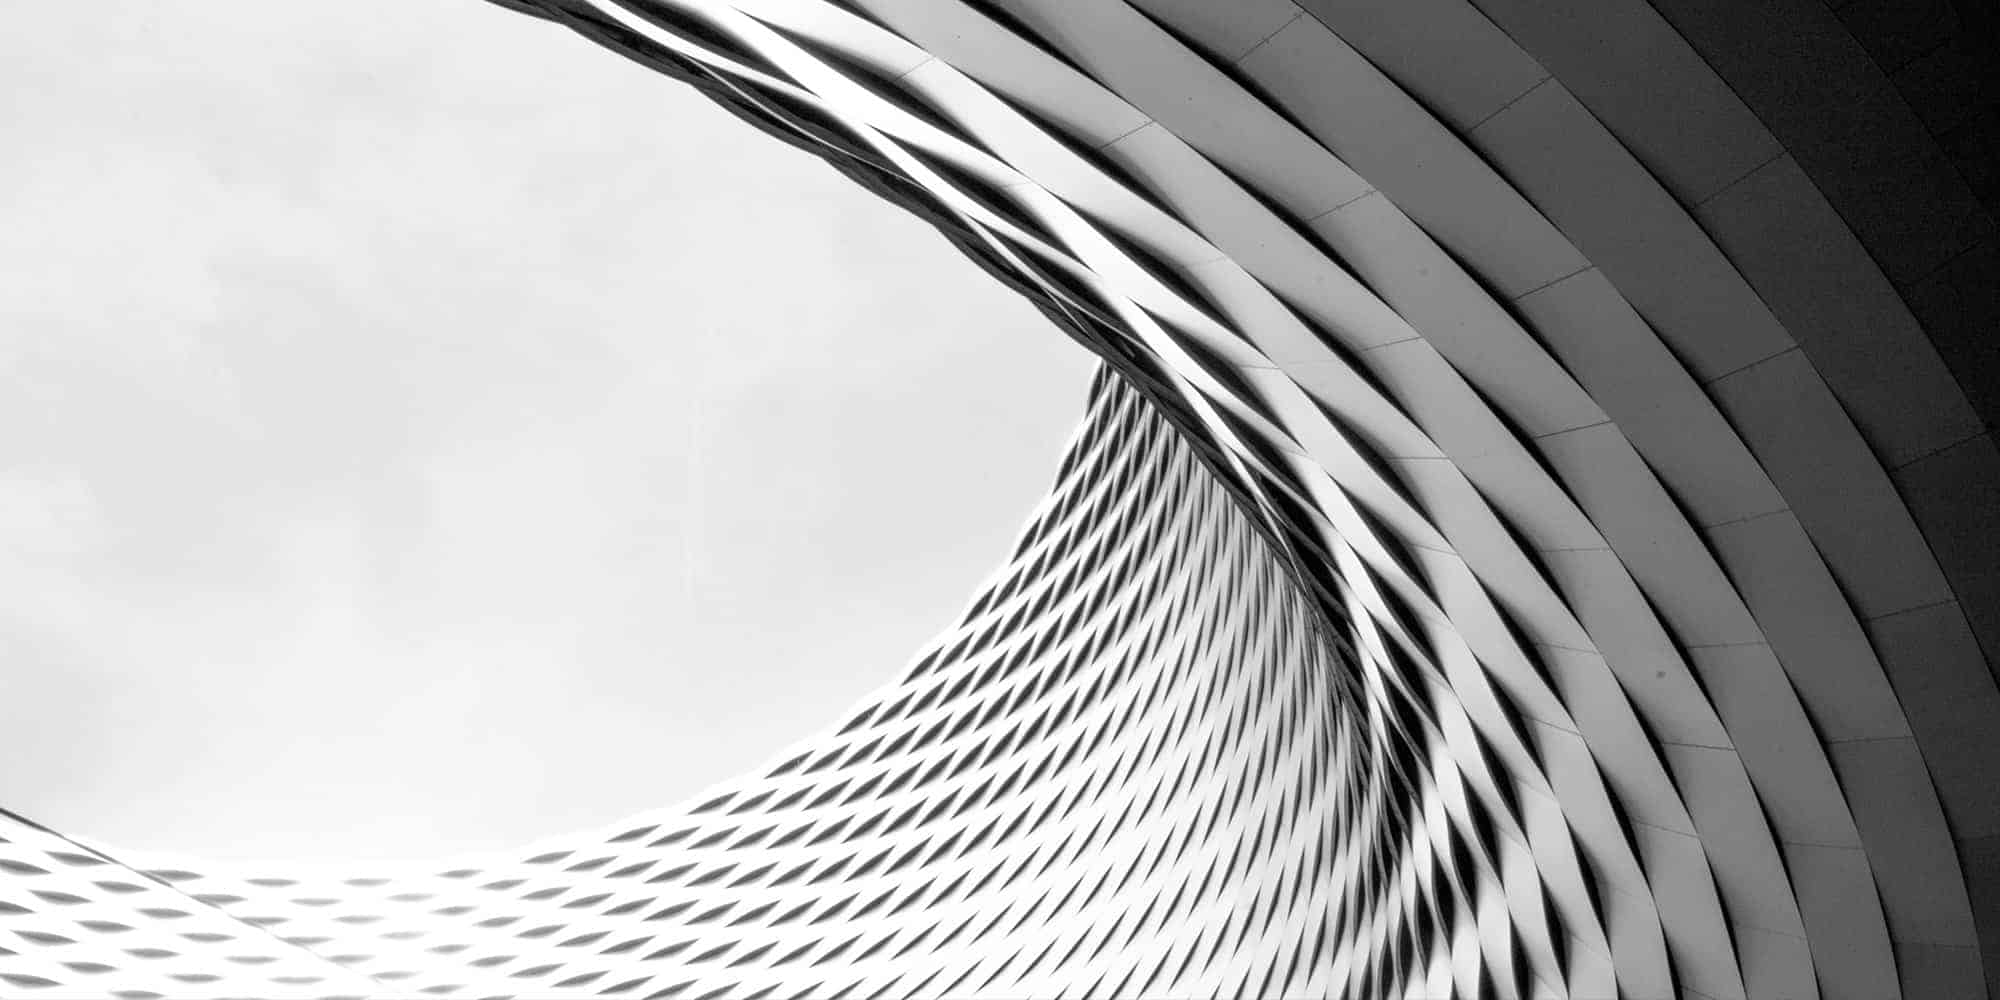 Monochrome architectural detail showcasing a curved facade with repetitive geometric patterns.